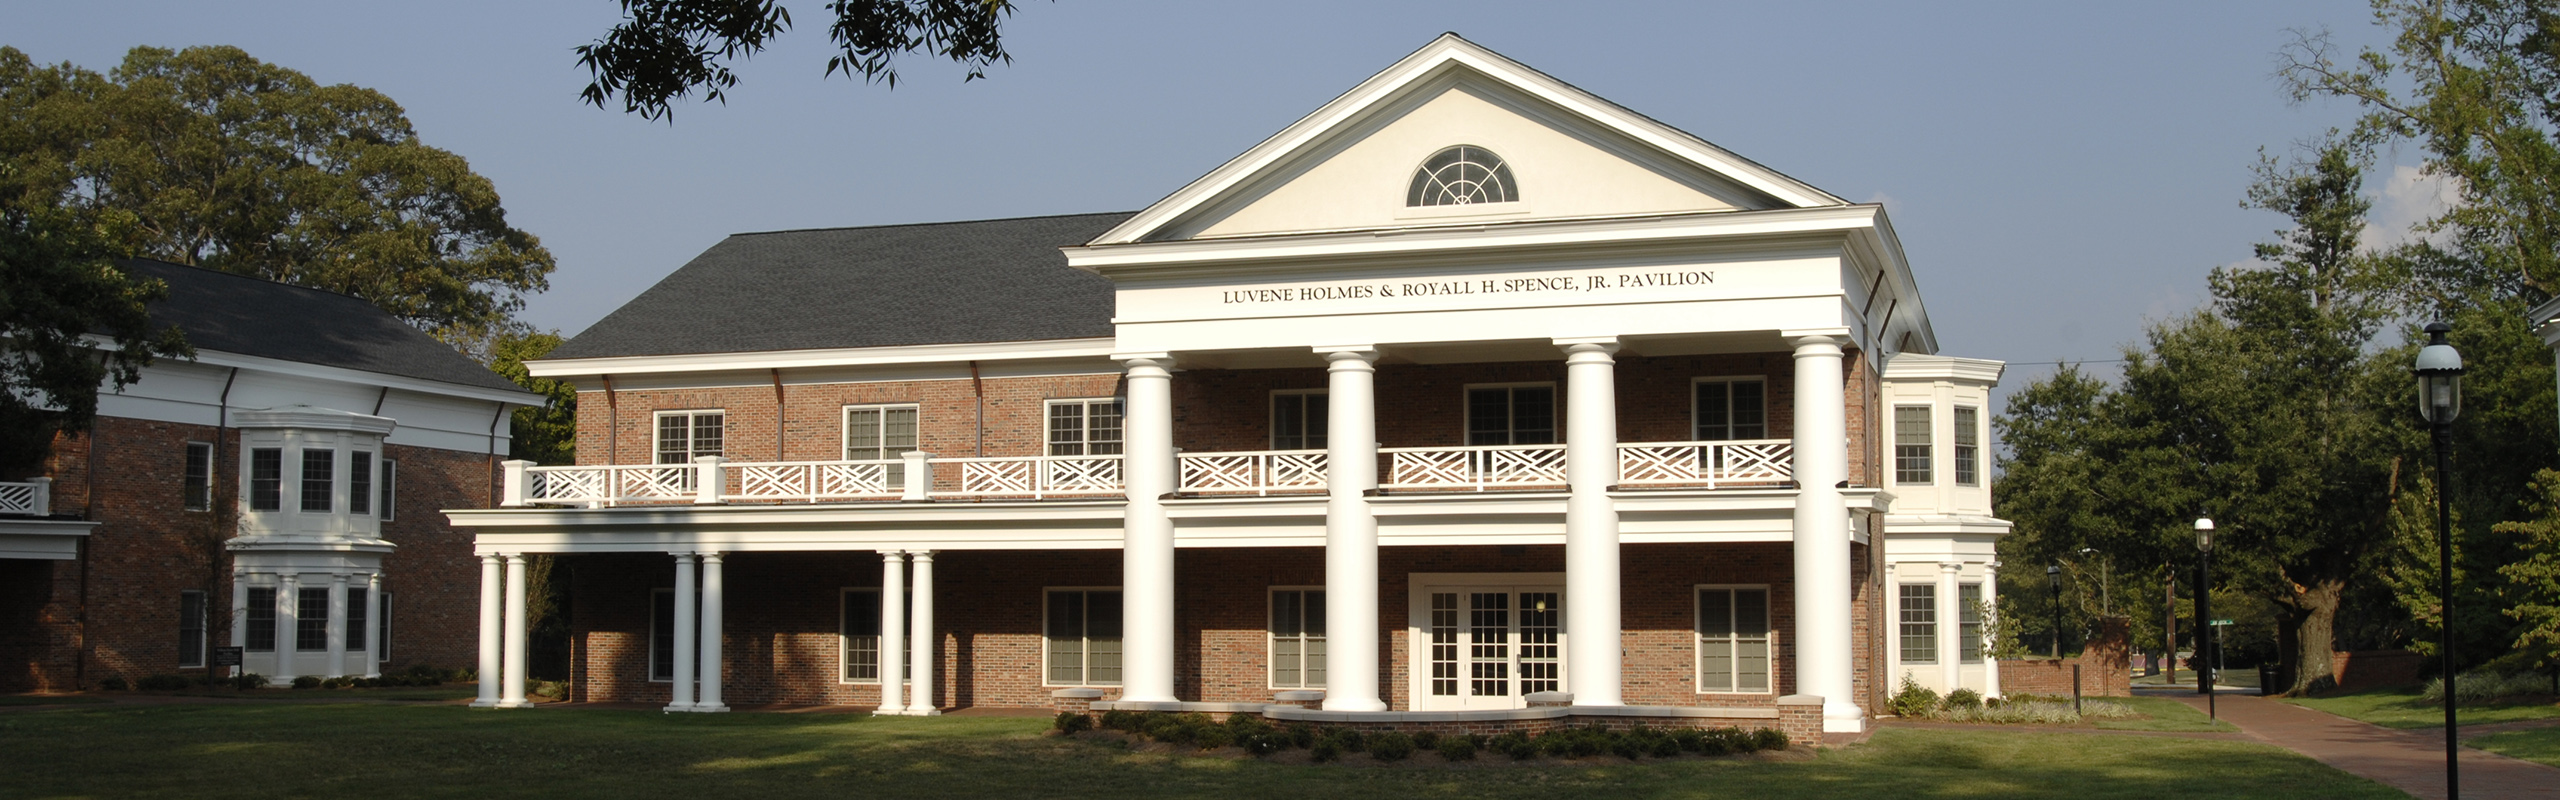 The Luvene Holmes and Royall H. Spence, Jr. Pavilion in the Academic Village